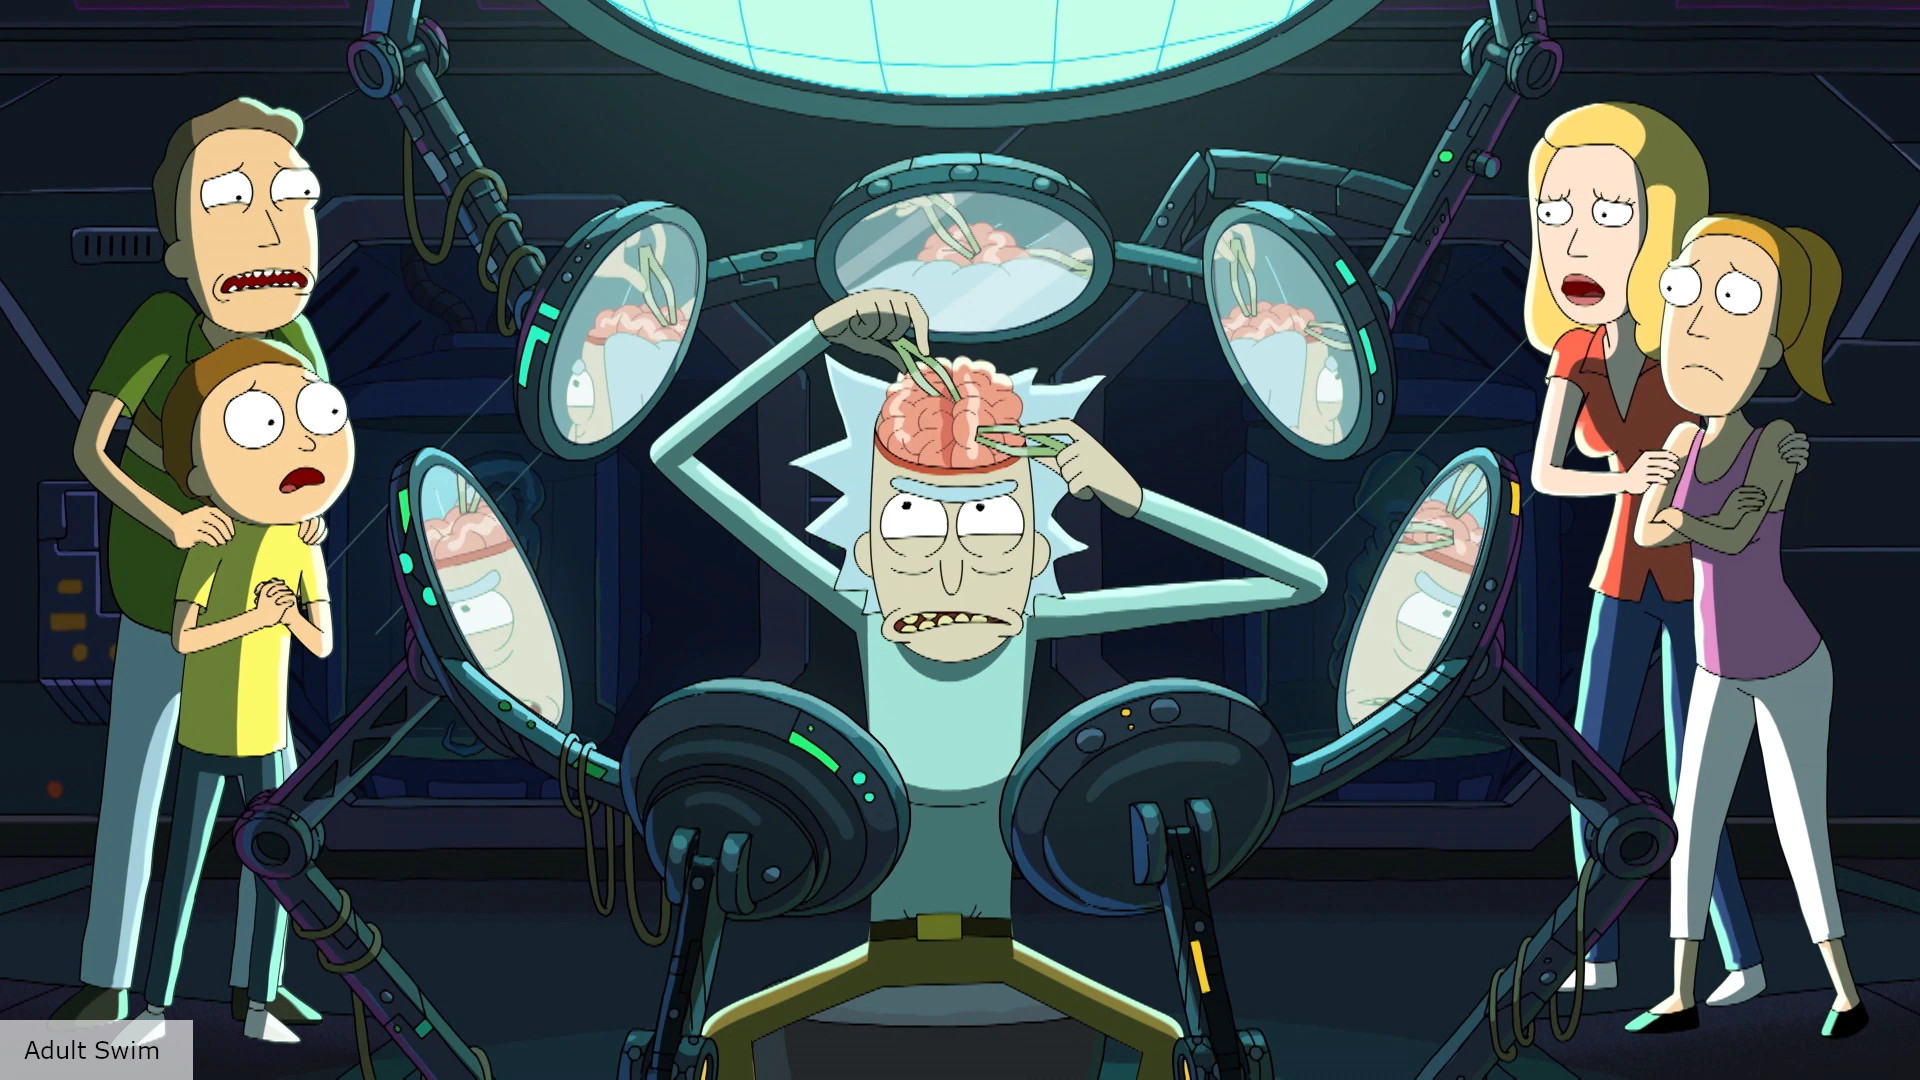 Rick and Morty season 6 release date, trailer, and more | The Digital Fix